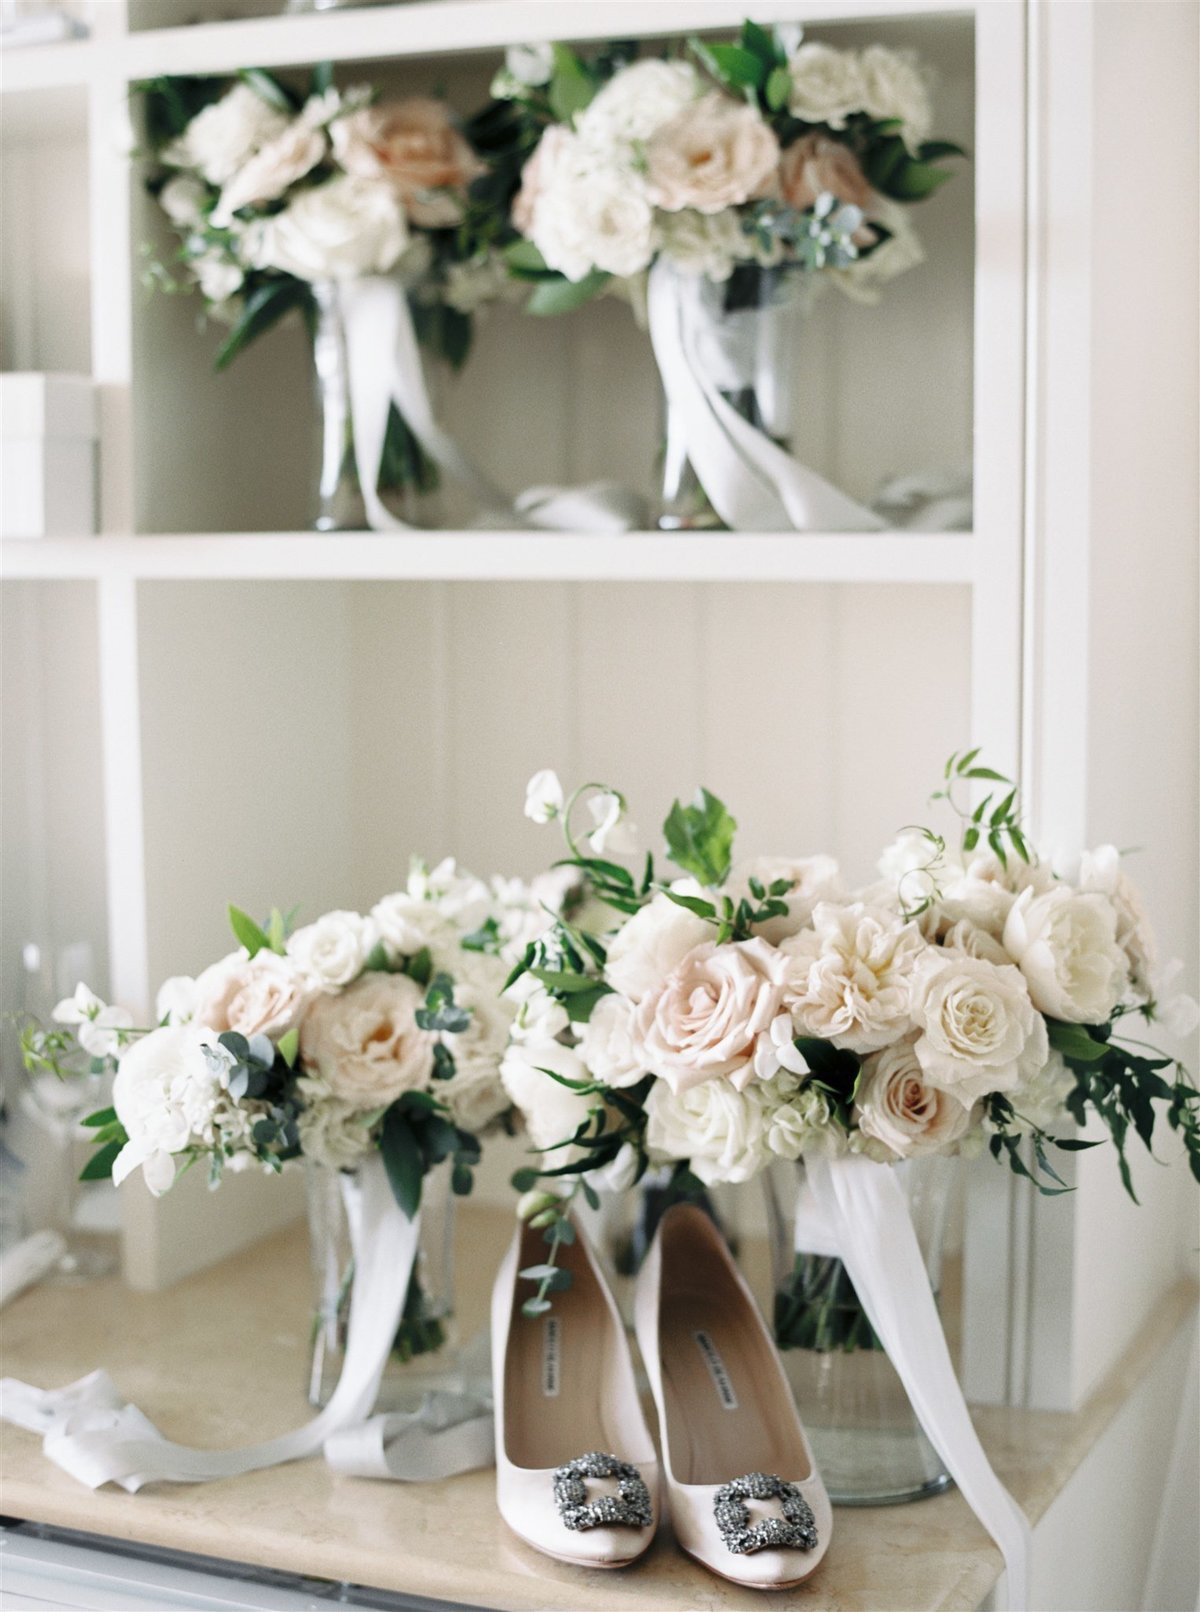 Manolo Blahnik shoes and garden inspired bouquets for a Cape Cod Wedding by luxury Cape Cod wedding planner and designer Always Yours Events